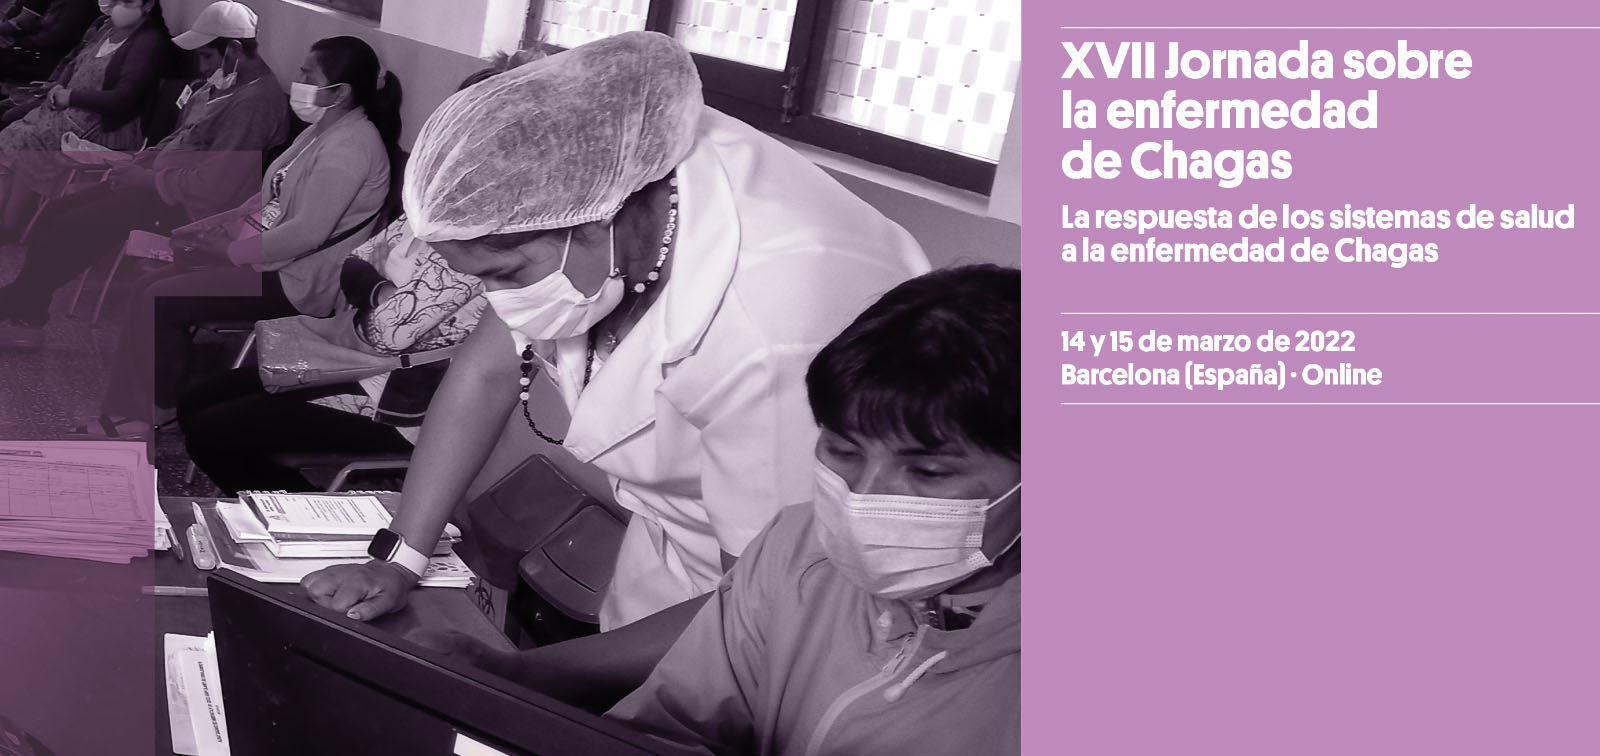 Publication of the 17th Workshop on Chagas Disease